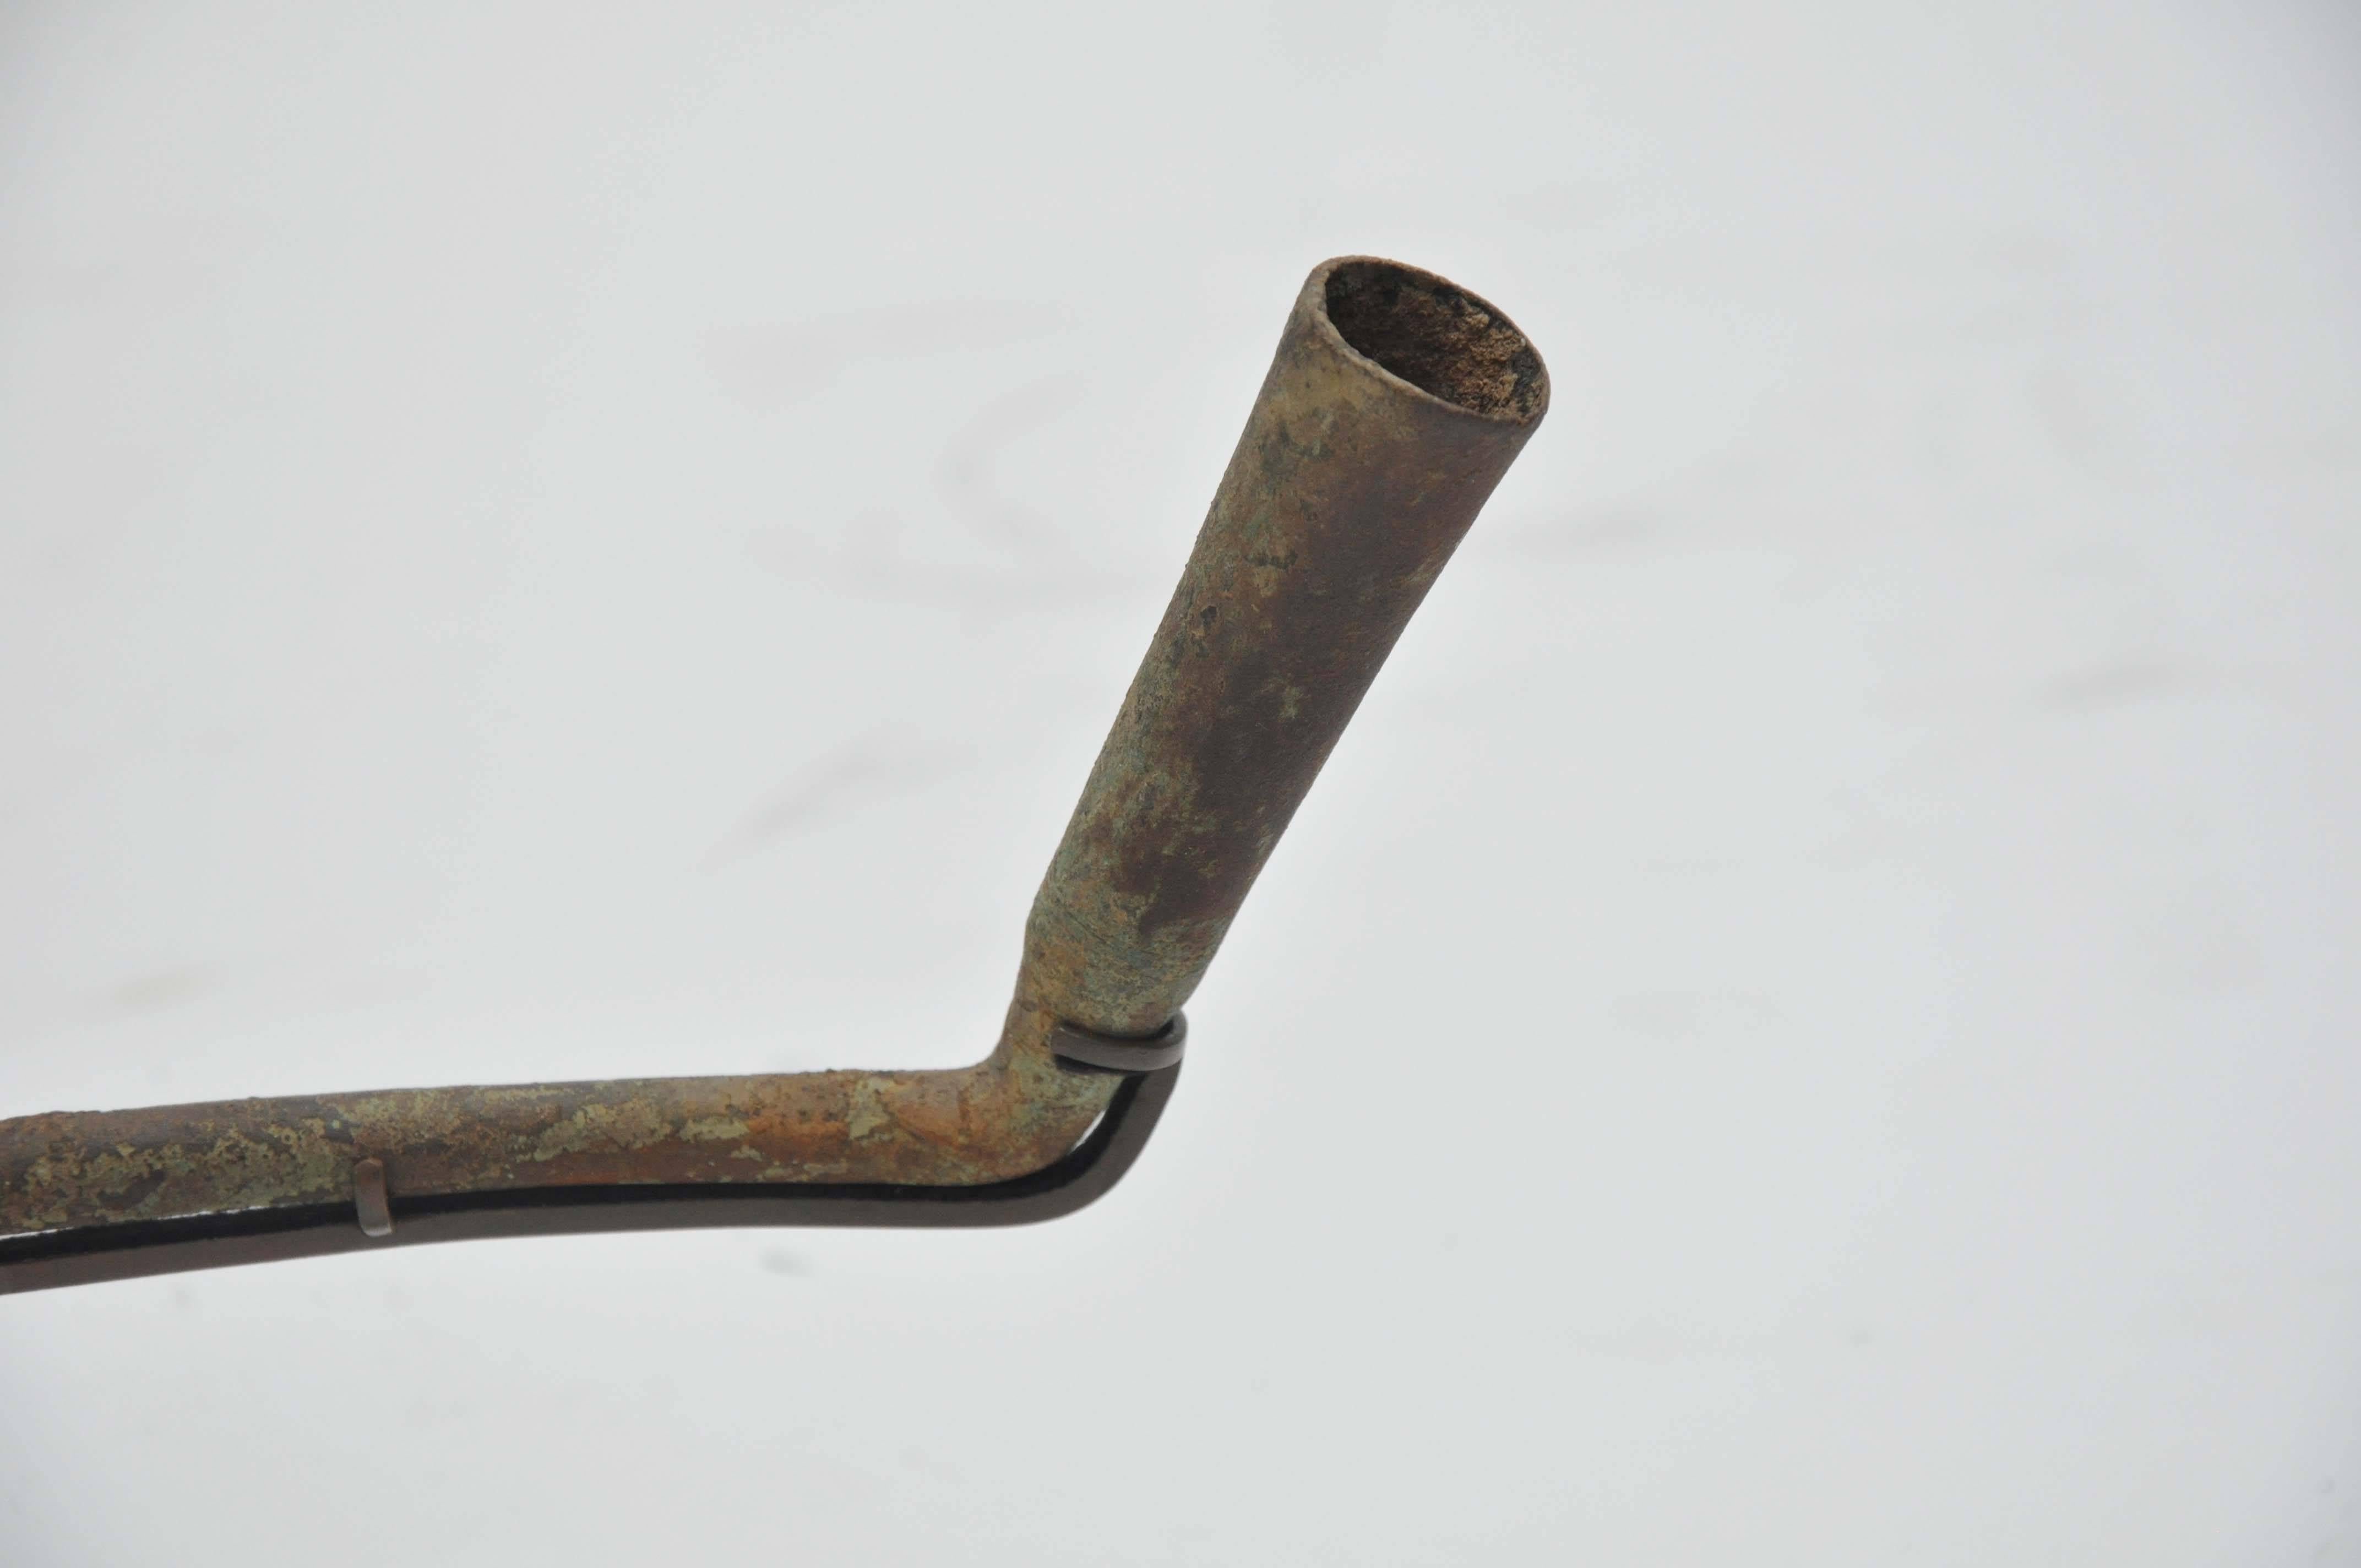 17th century southeast Asian Rare Medieval tobacco pipe. Unearthed in the Central Highlands of Viet Nam near the Cambodian Border Tay Nguyen Plateau, Montagnard, Jarai Tribe Est, 17th century possibly earlier. Bronze pipe bowl with short curved stem